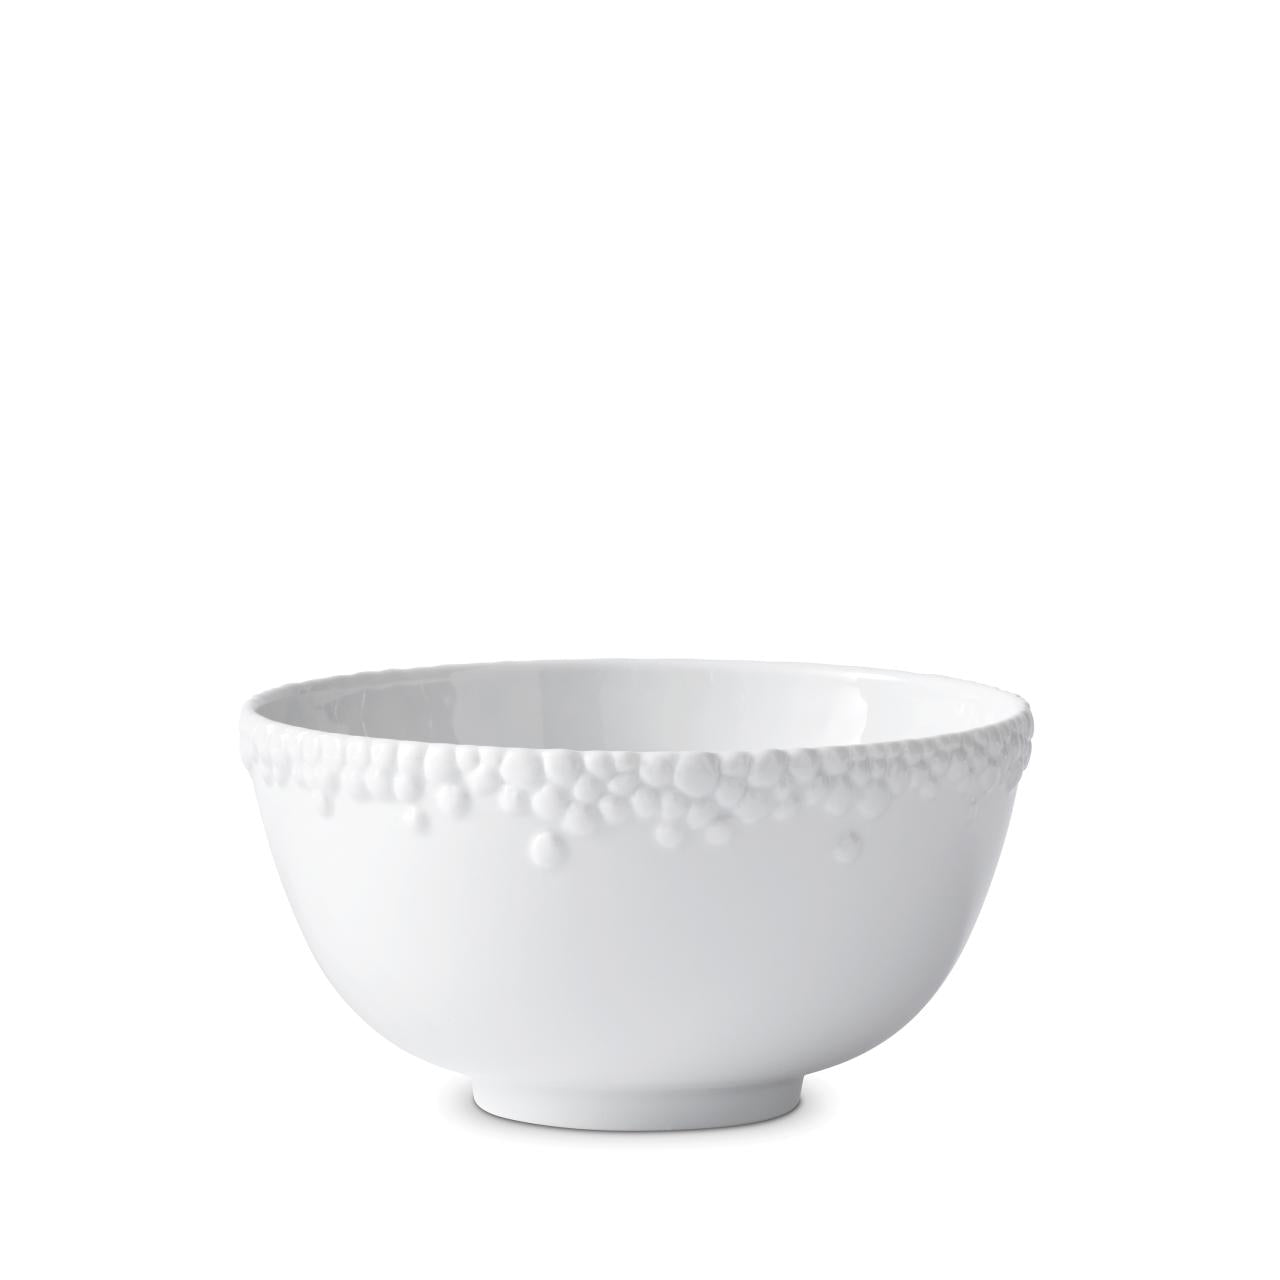 Haas Mojave Cereal Bowl White